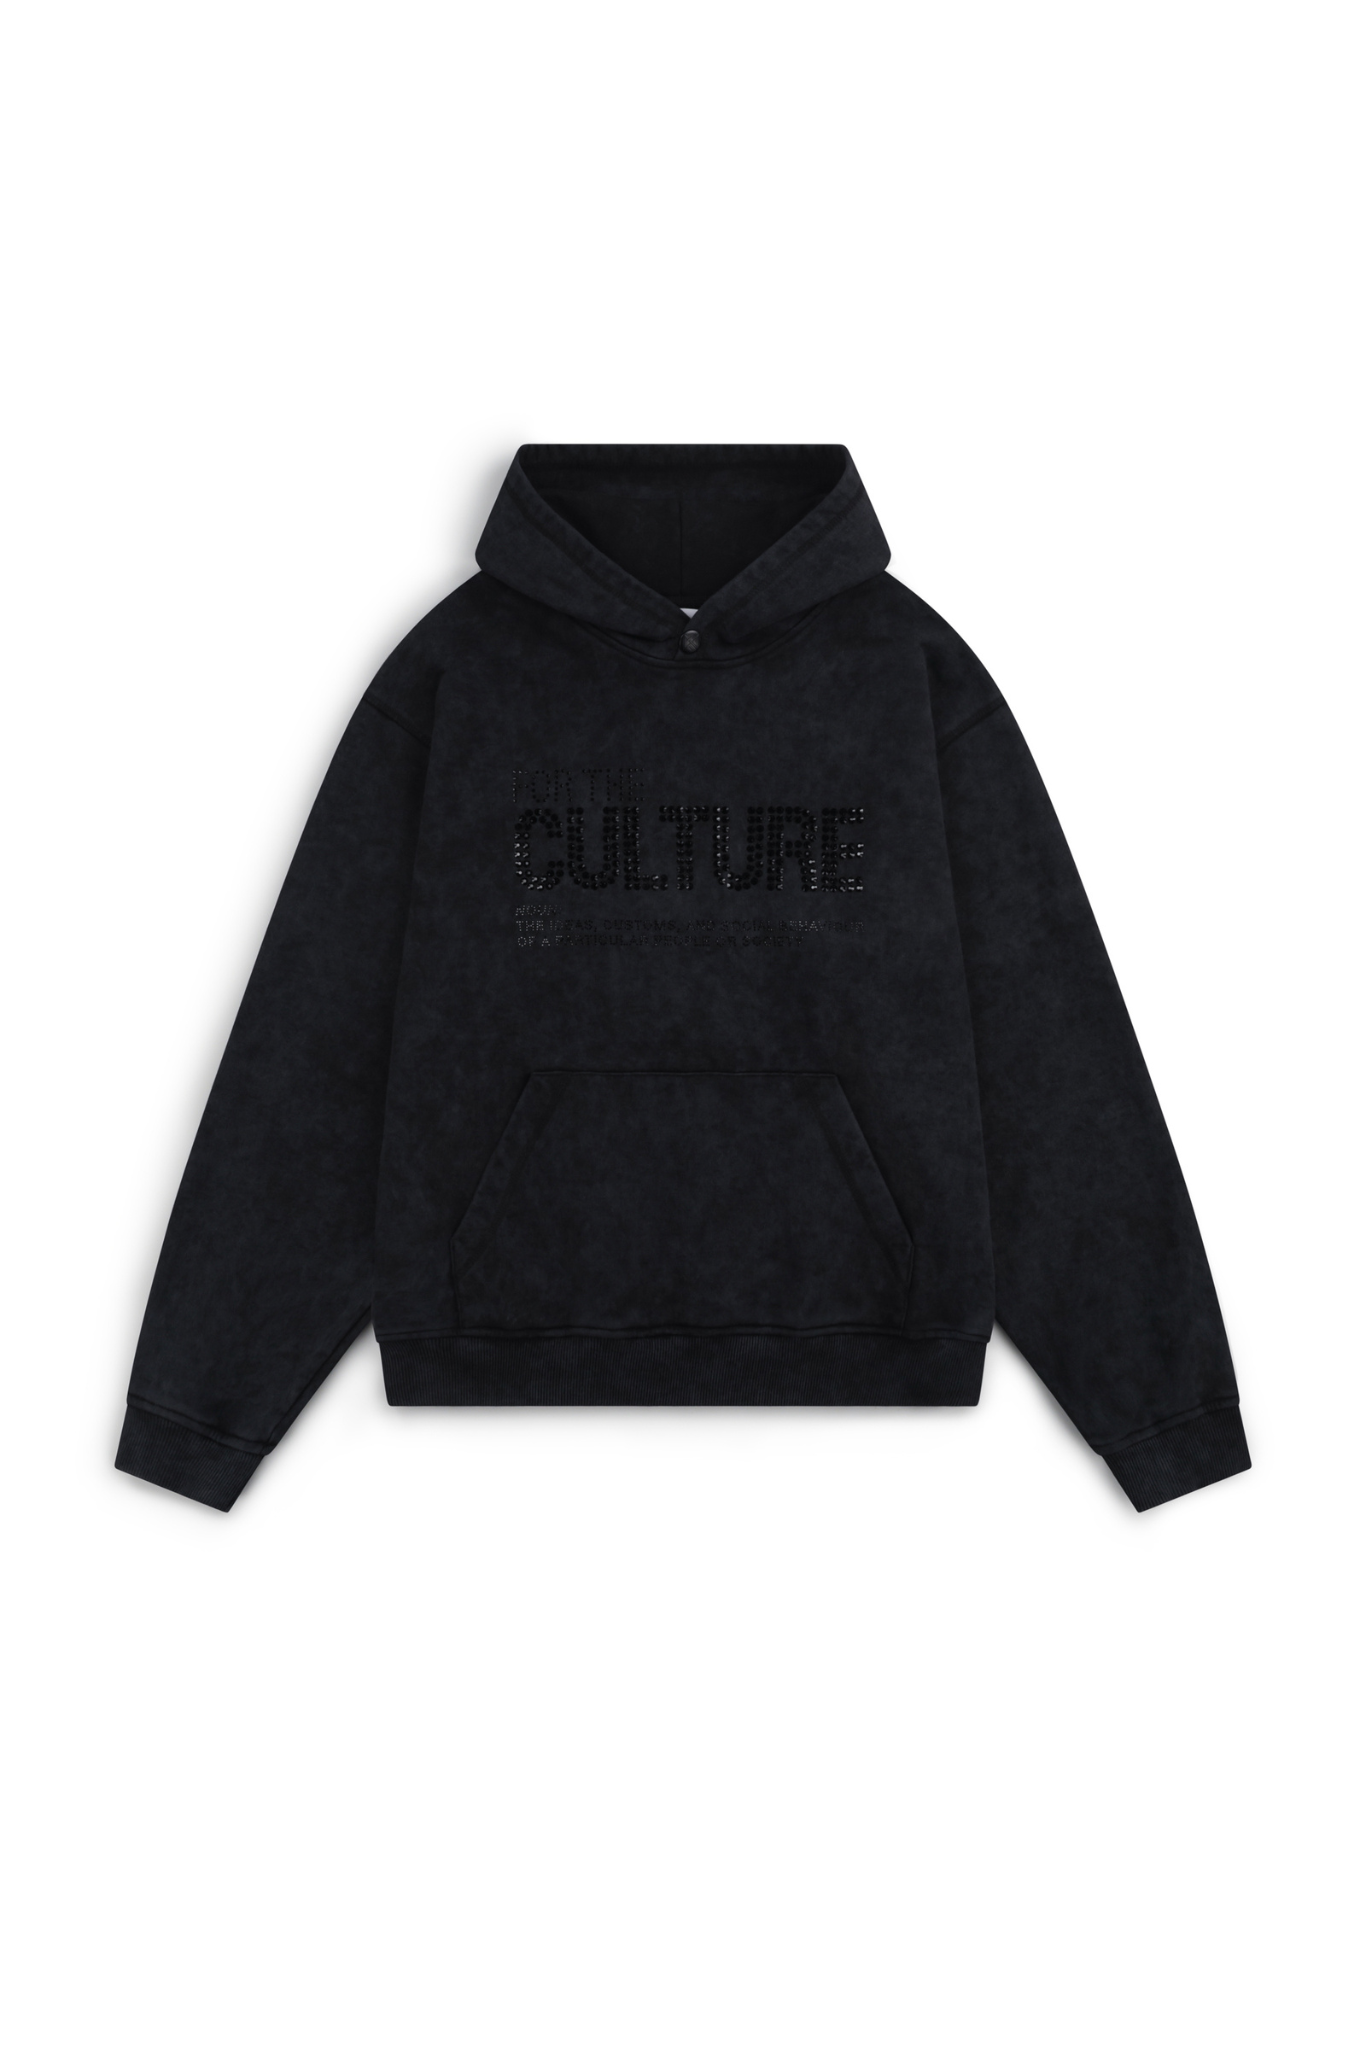 For The Culture Hoodie Onyx - Real Artistic People